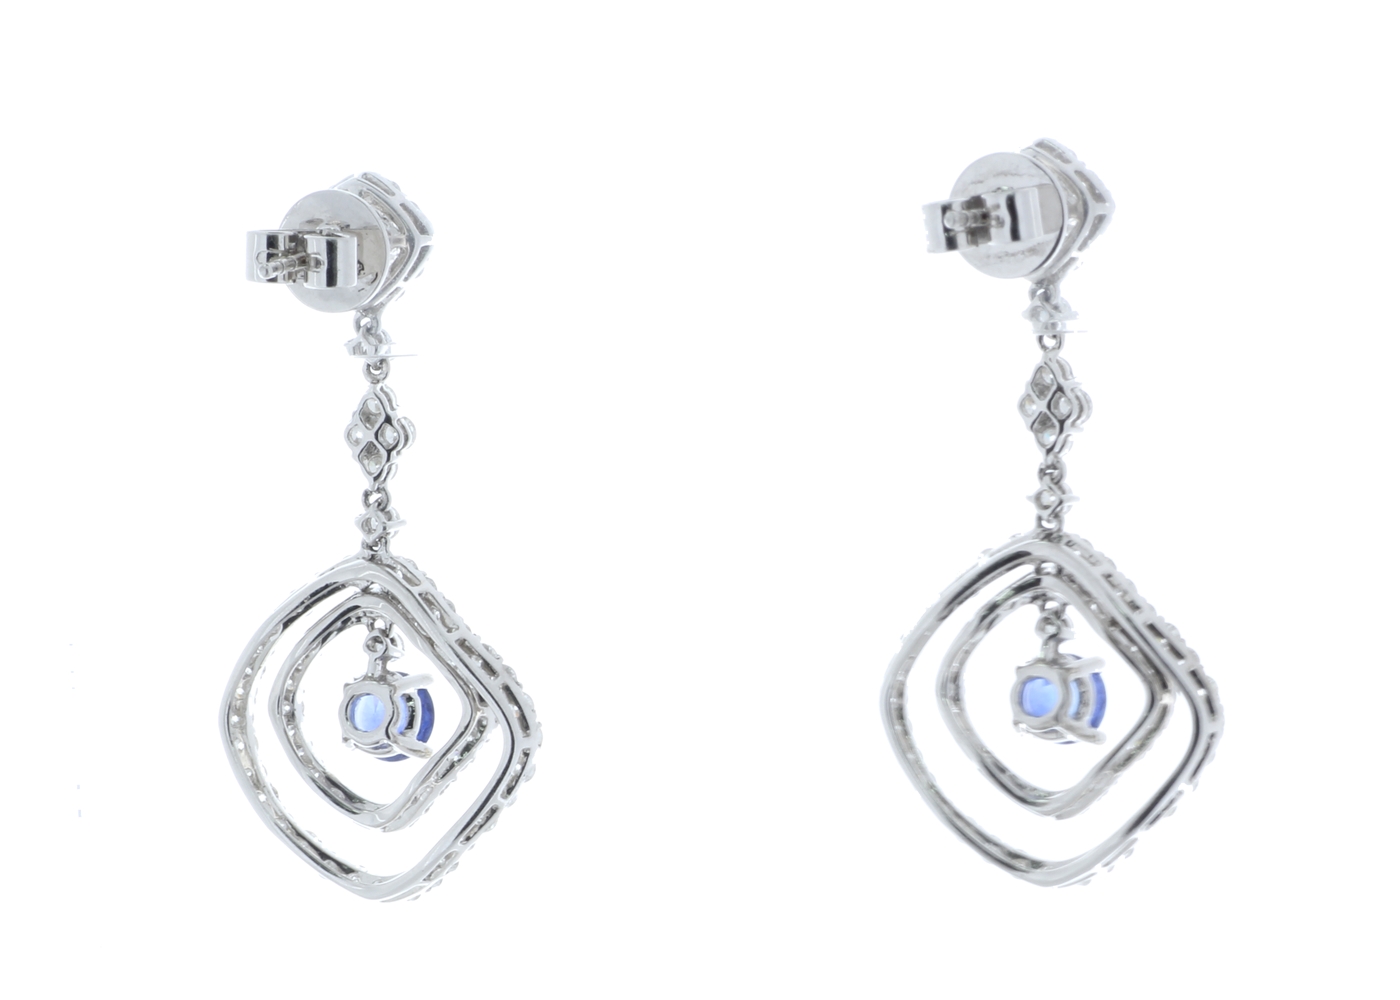 18ct White Gold Diamond And Sapphire Drop Earrings (S1.02) 1.75 Carats - Image 3 of 5